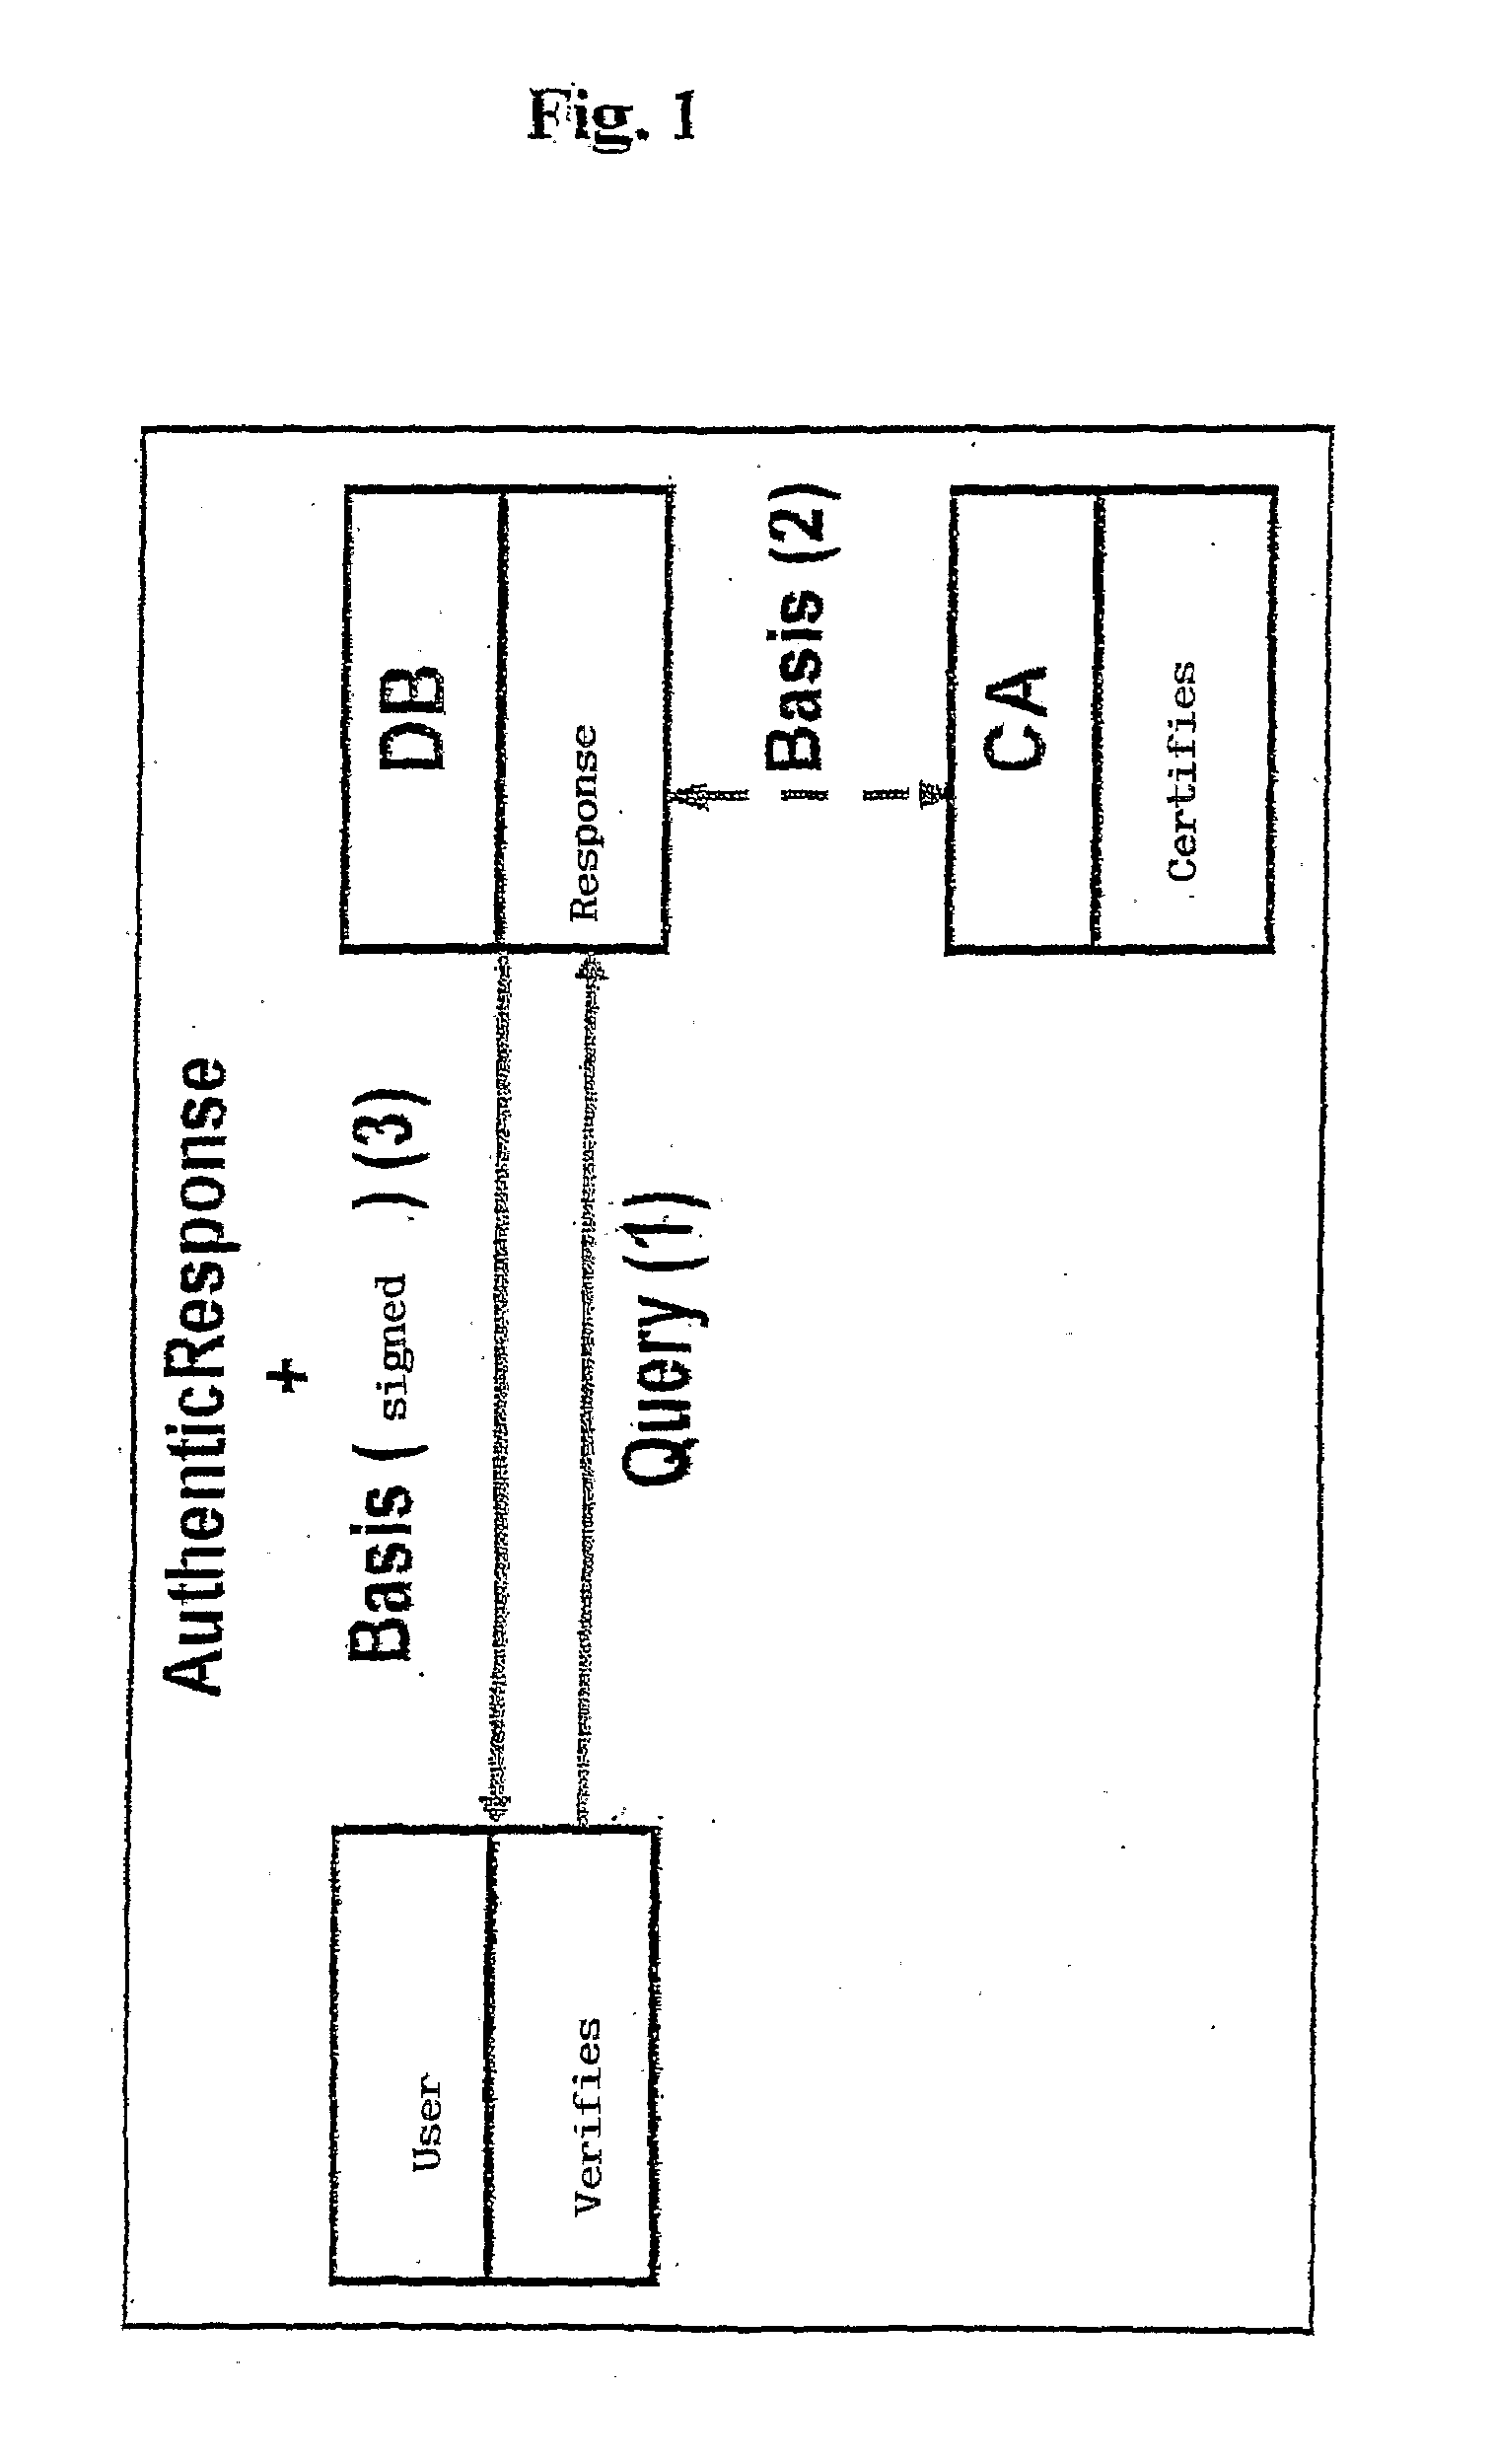 Method for dynamic secure management of an authenticated relational table in a database